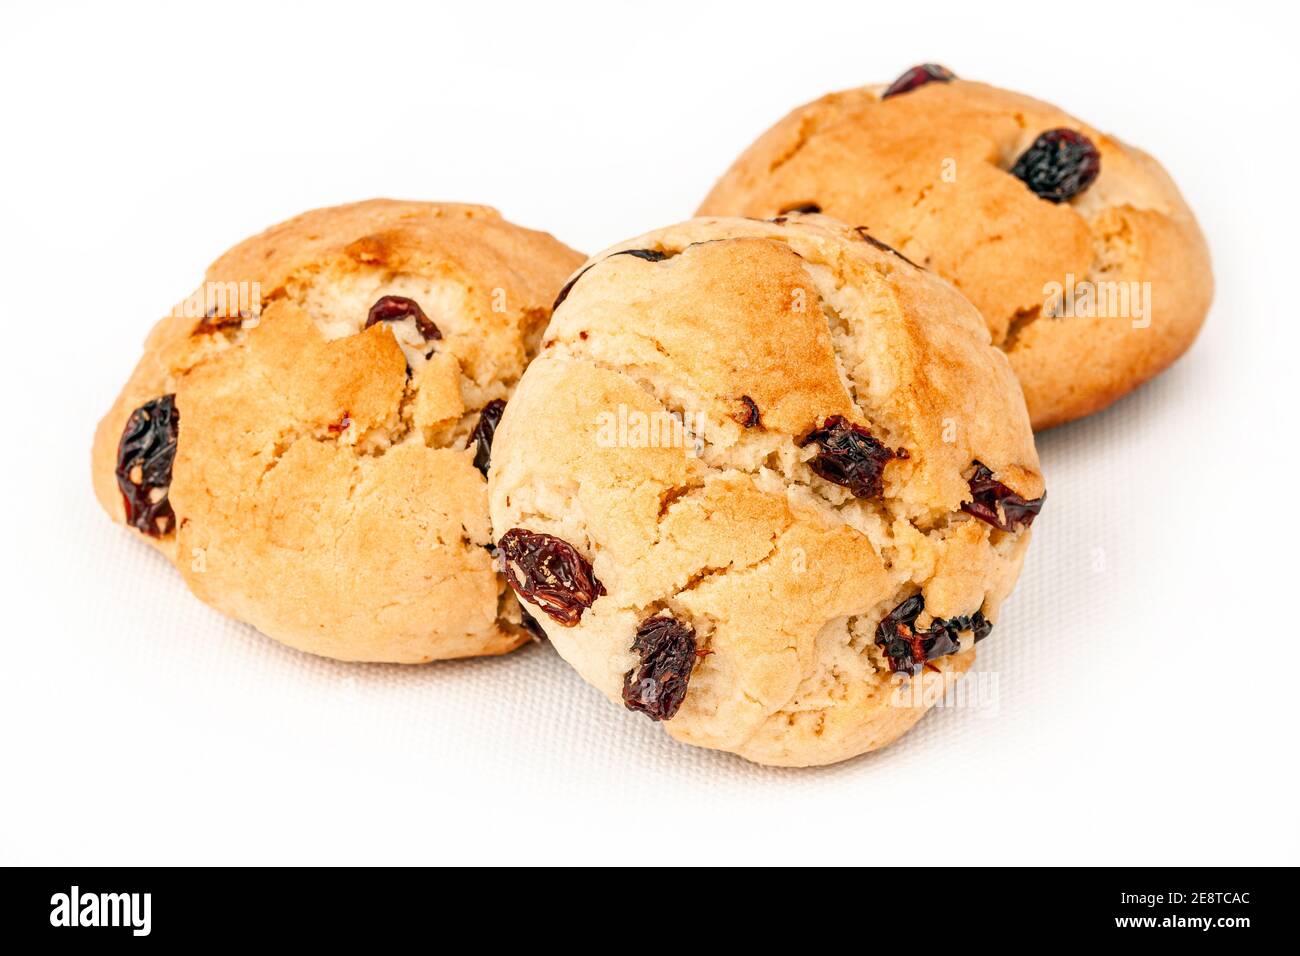 group of plenty raisin cookies on a white background, close-up view Stock Photo